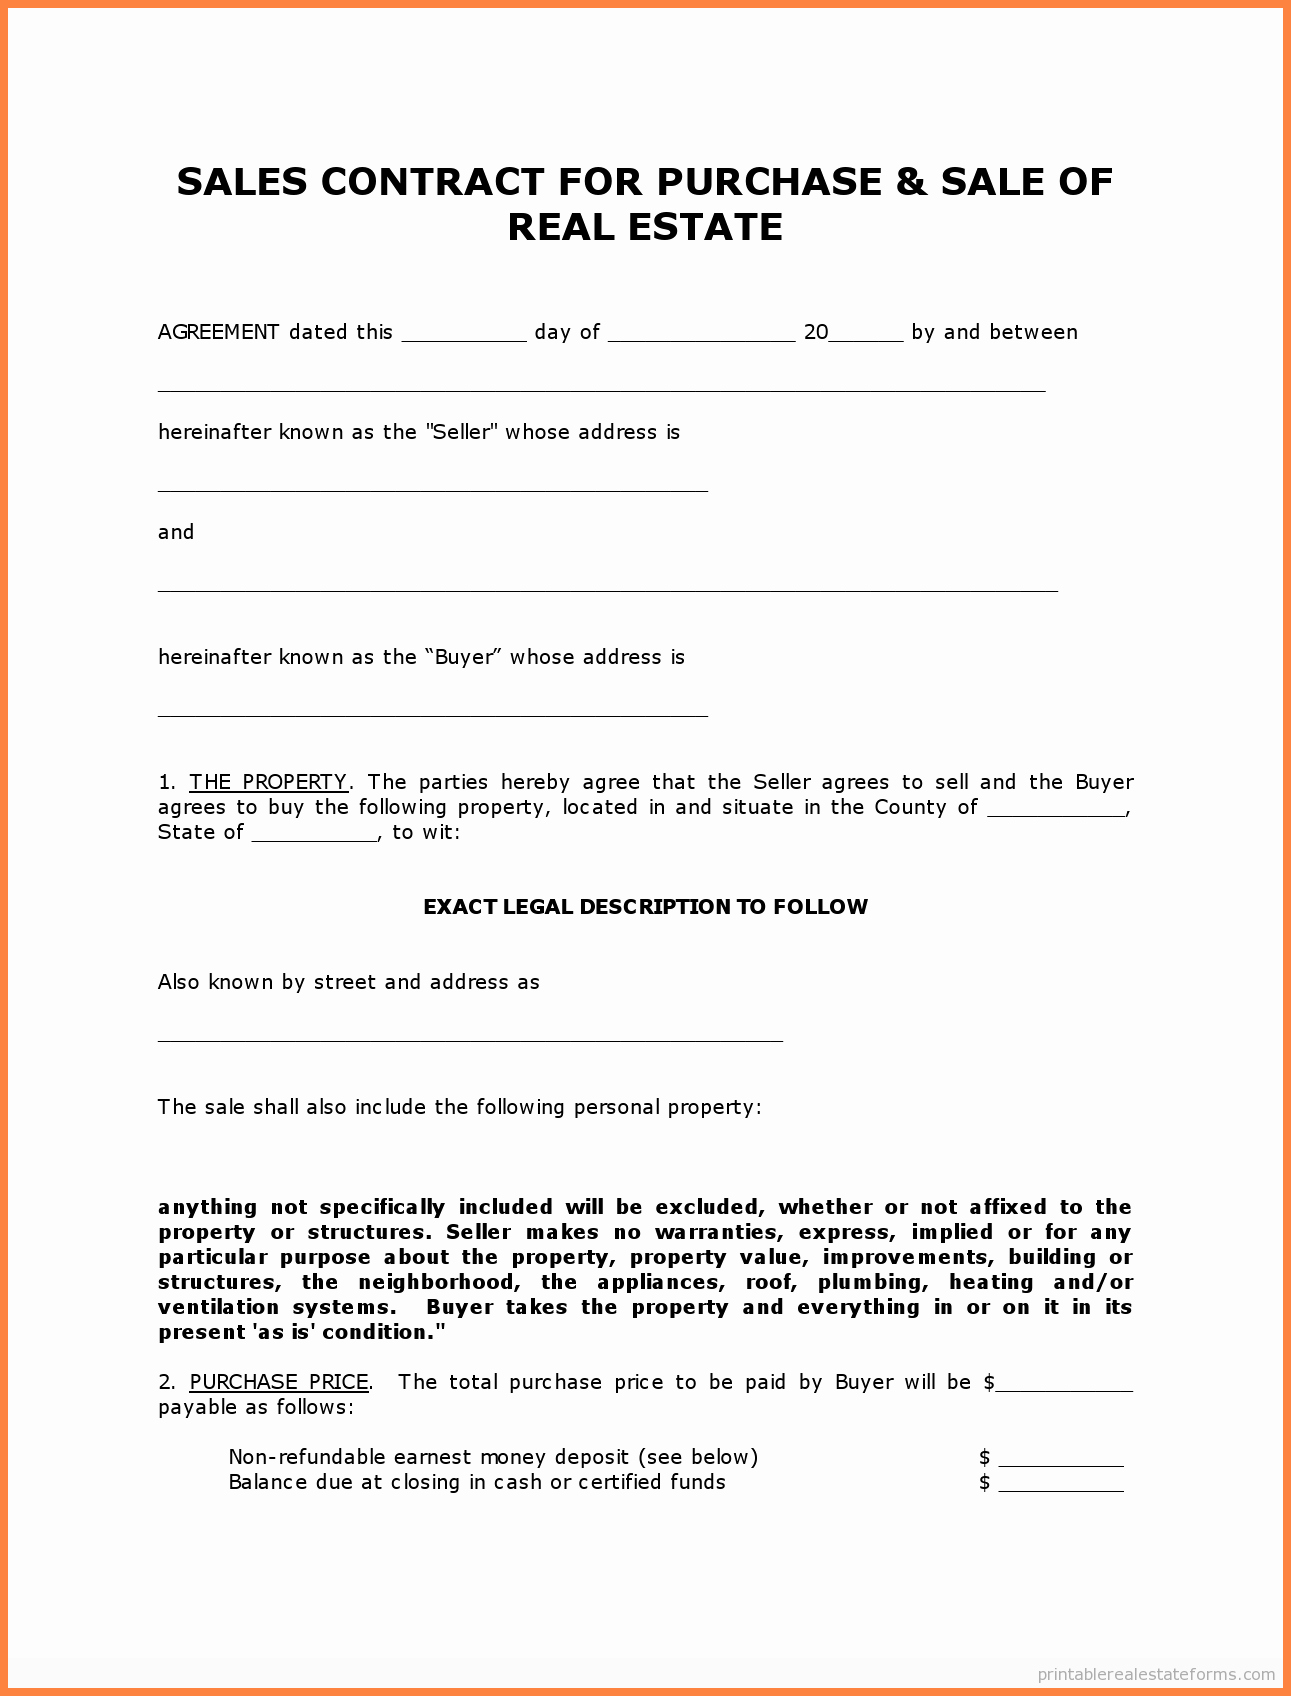 Simple Home Purchase Agreement Fresh 4 for Sale by Owner Purchase Agreement form